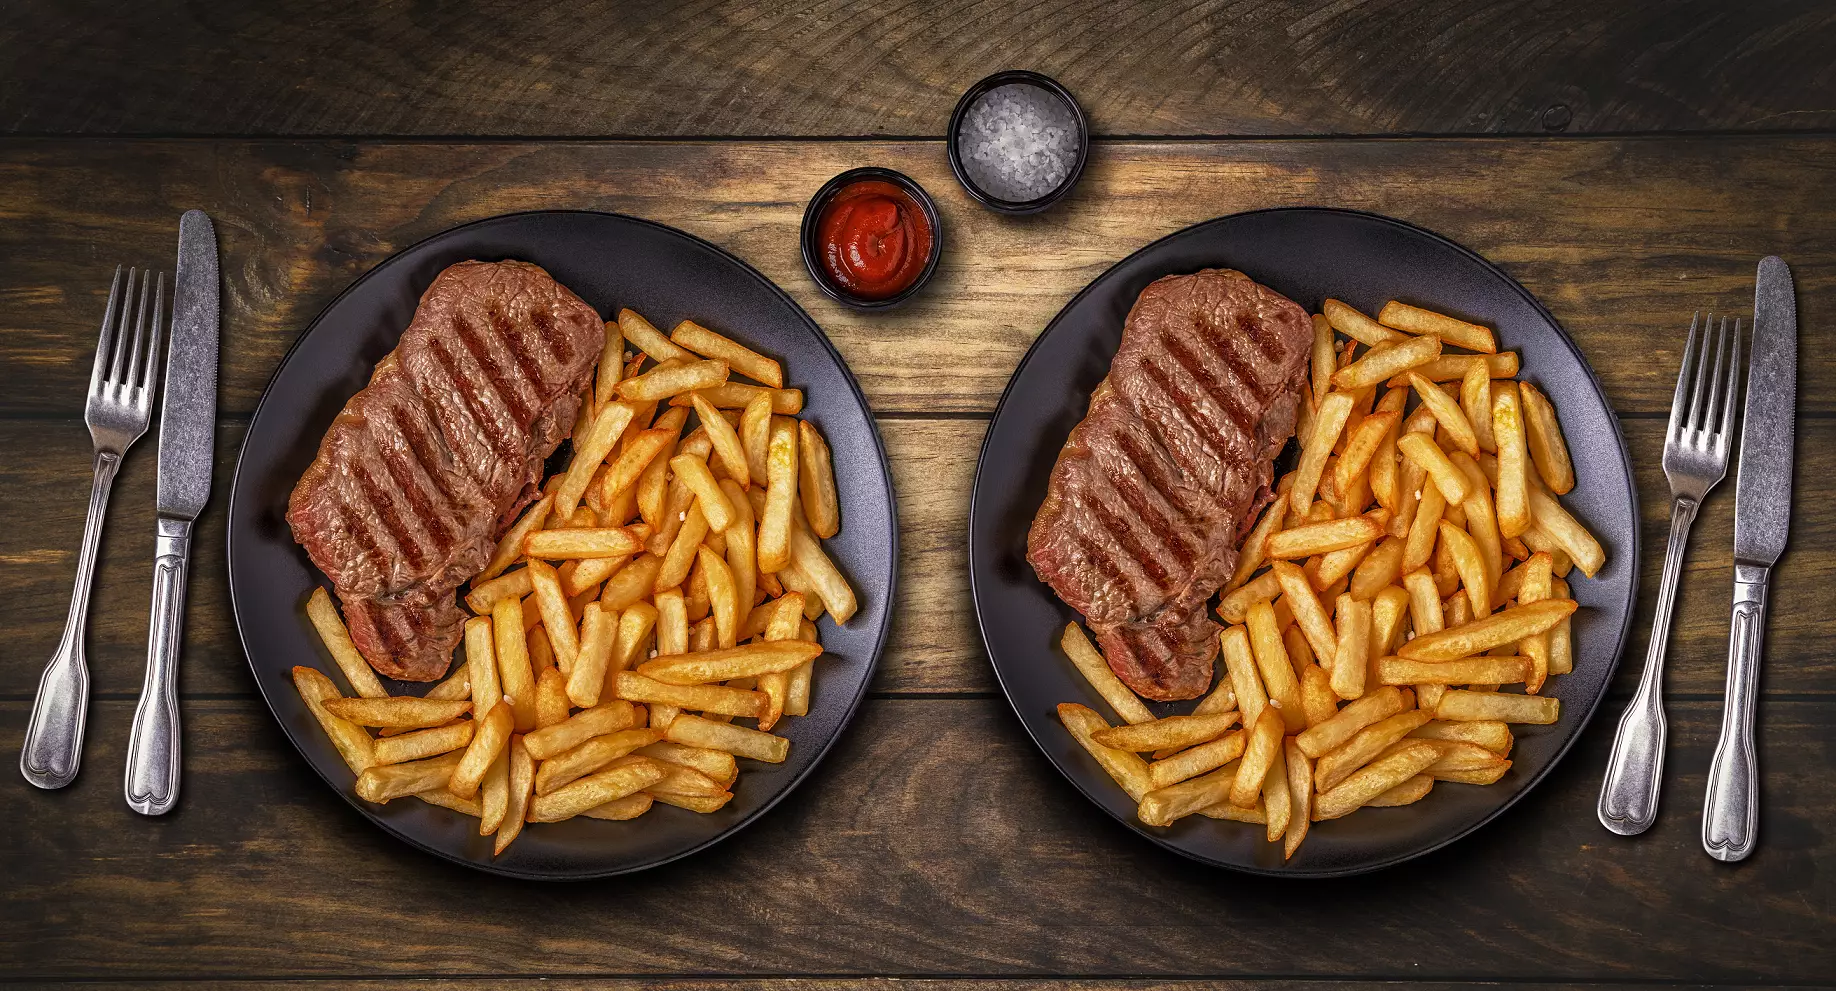 Morrisons is selling two ribeye steaks and chips for £5 - but the offer ends on Sunday.